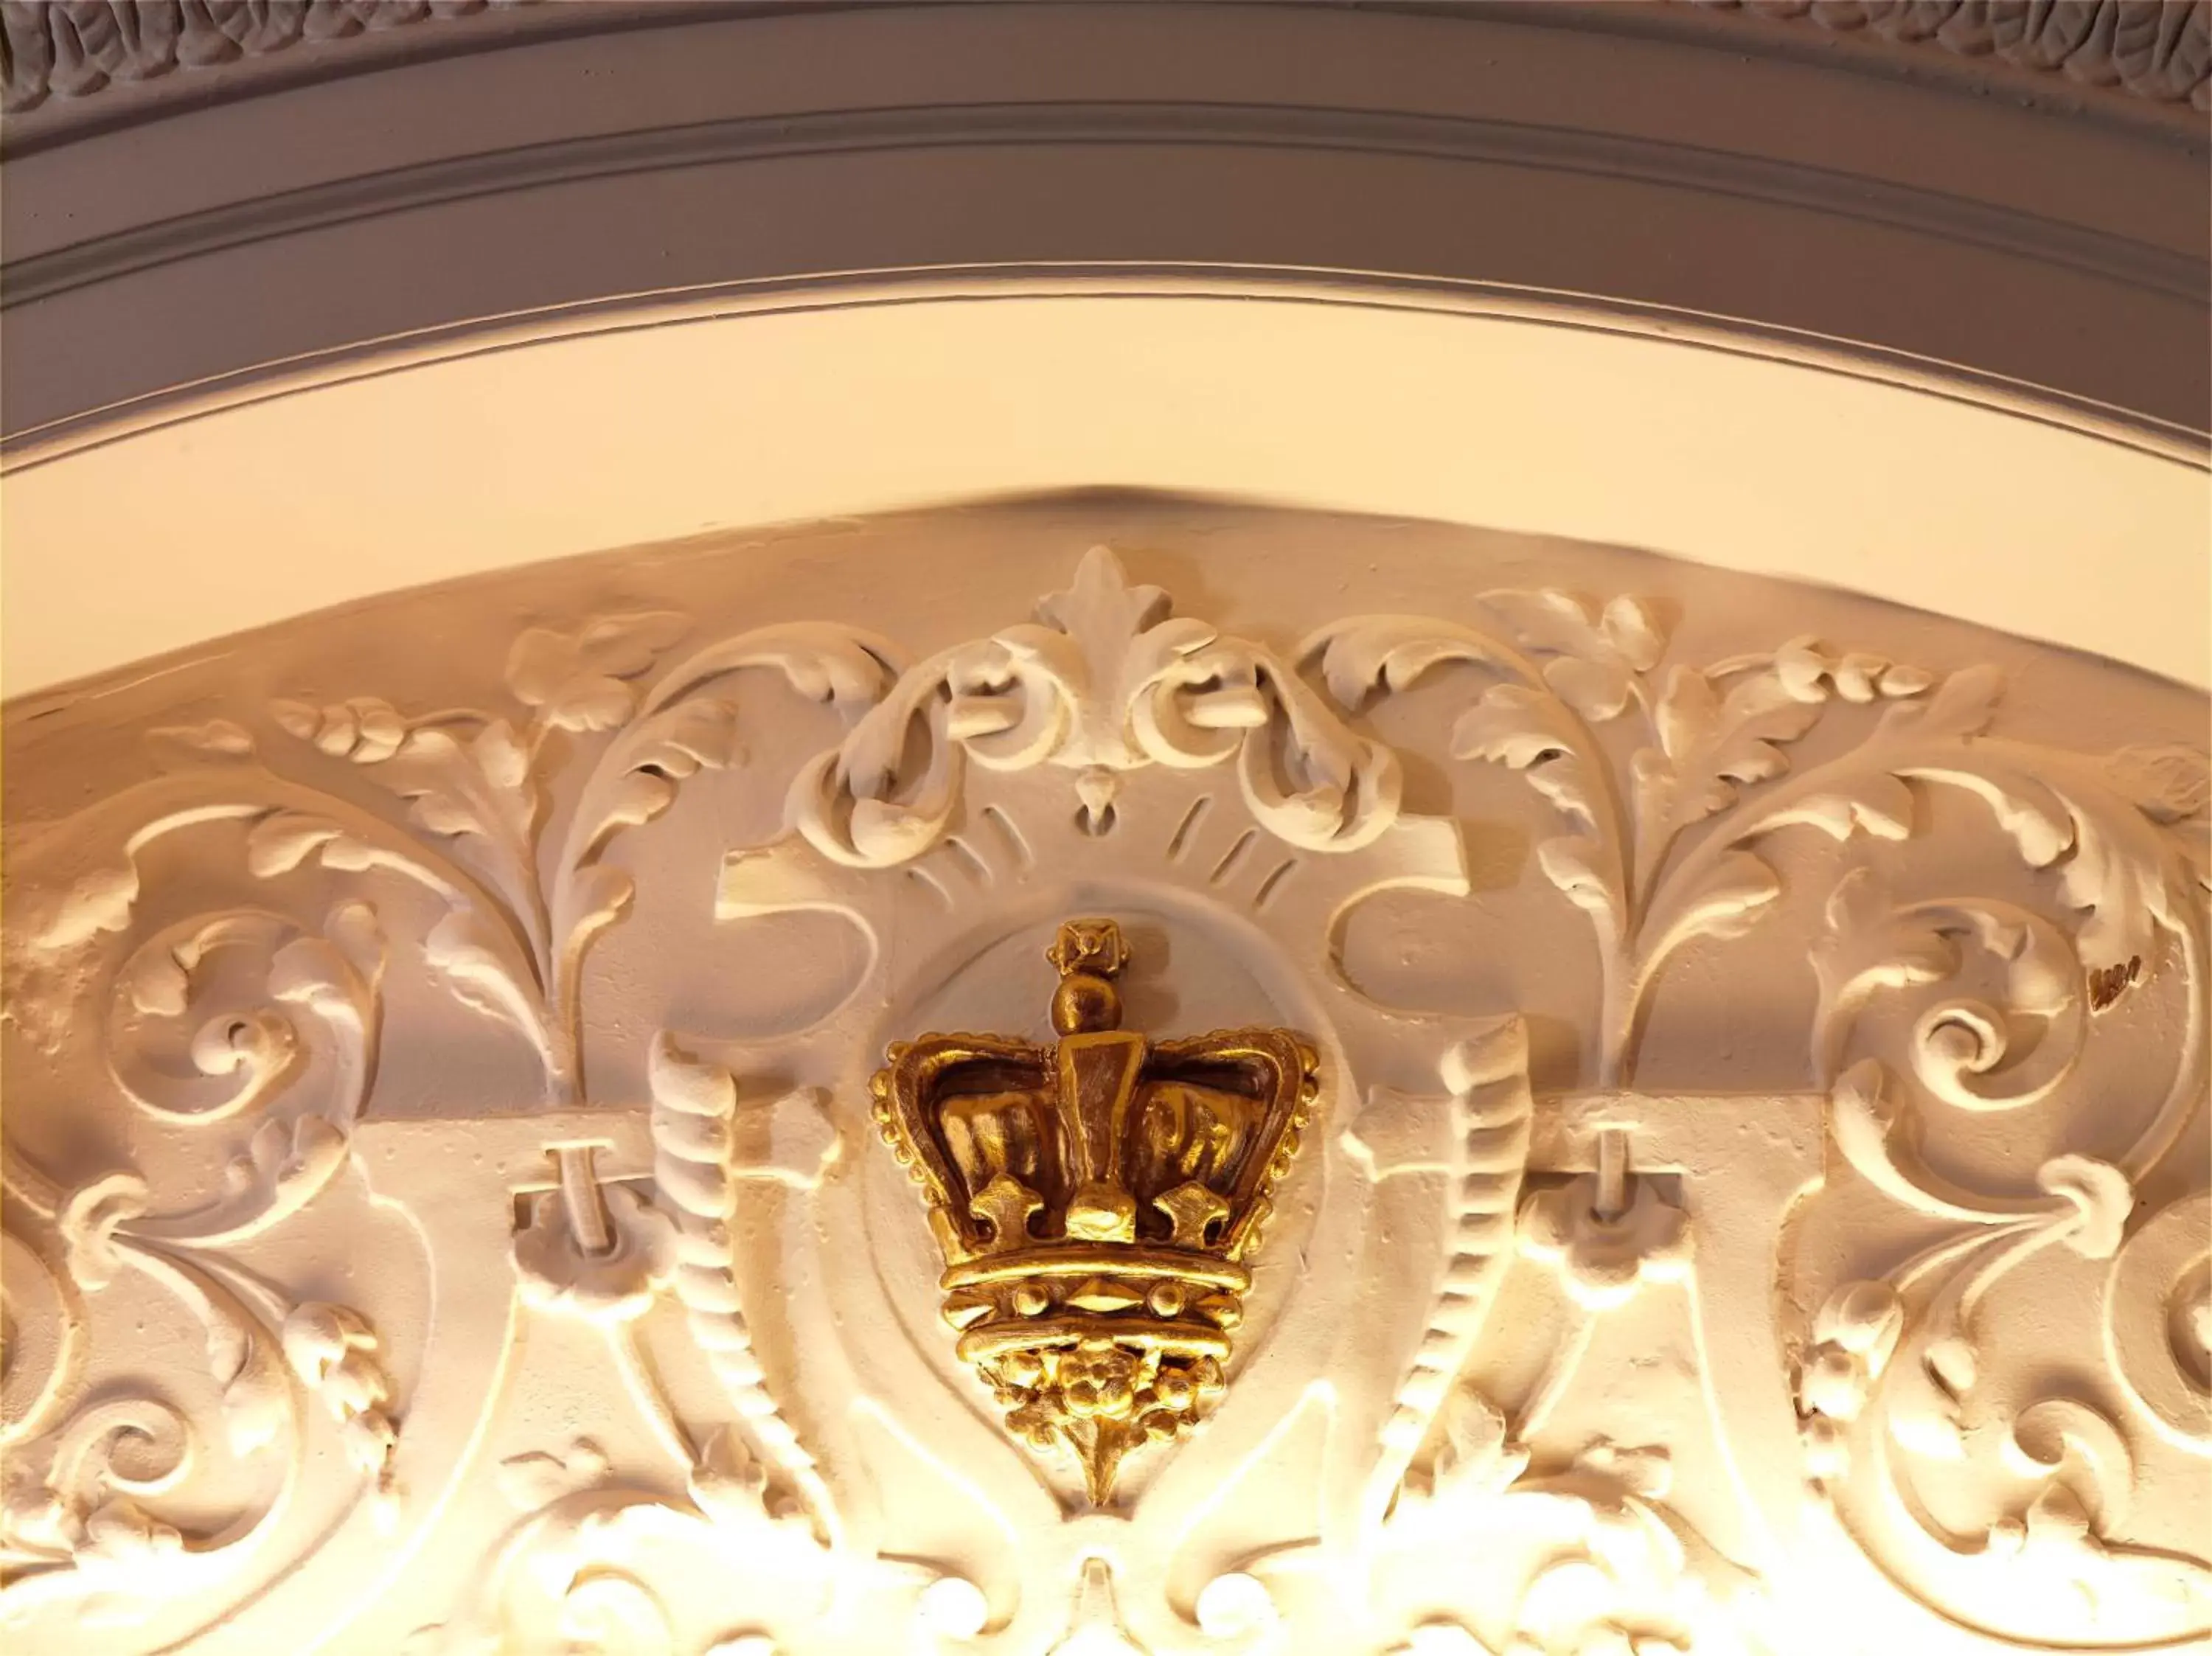 Decorative detail in The Crown Hotel